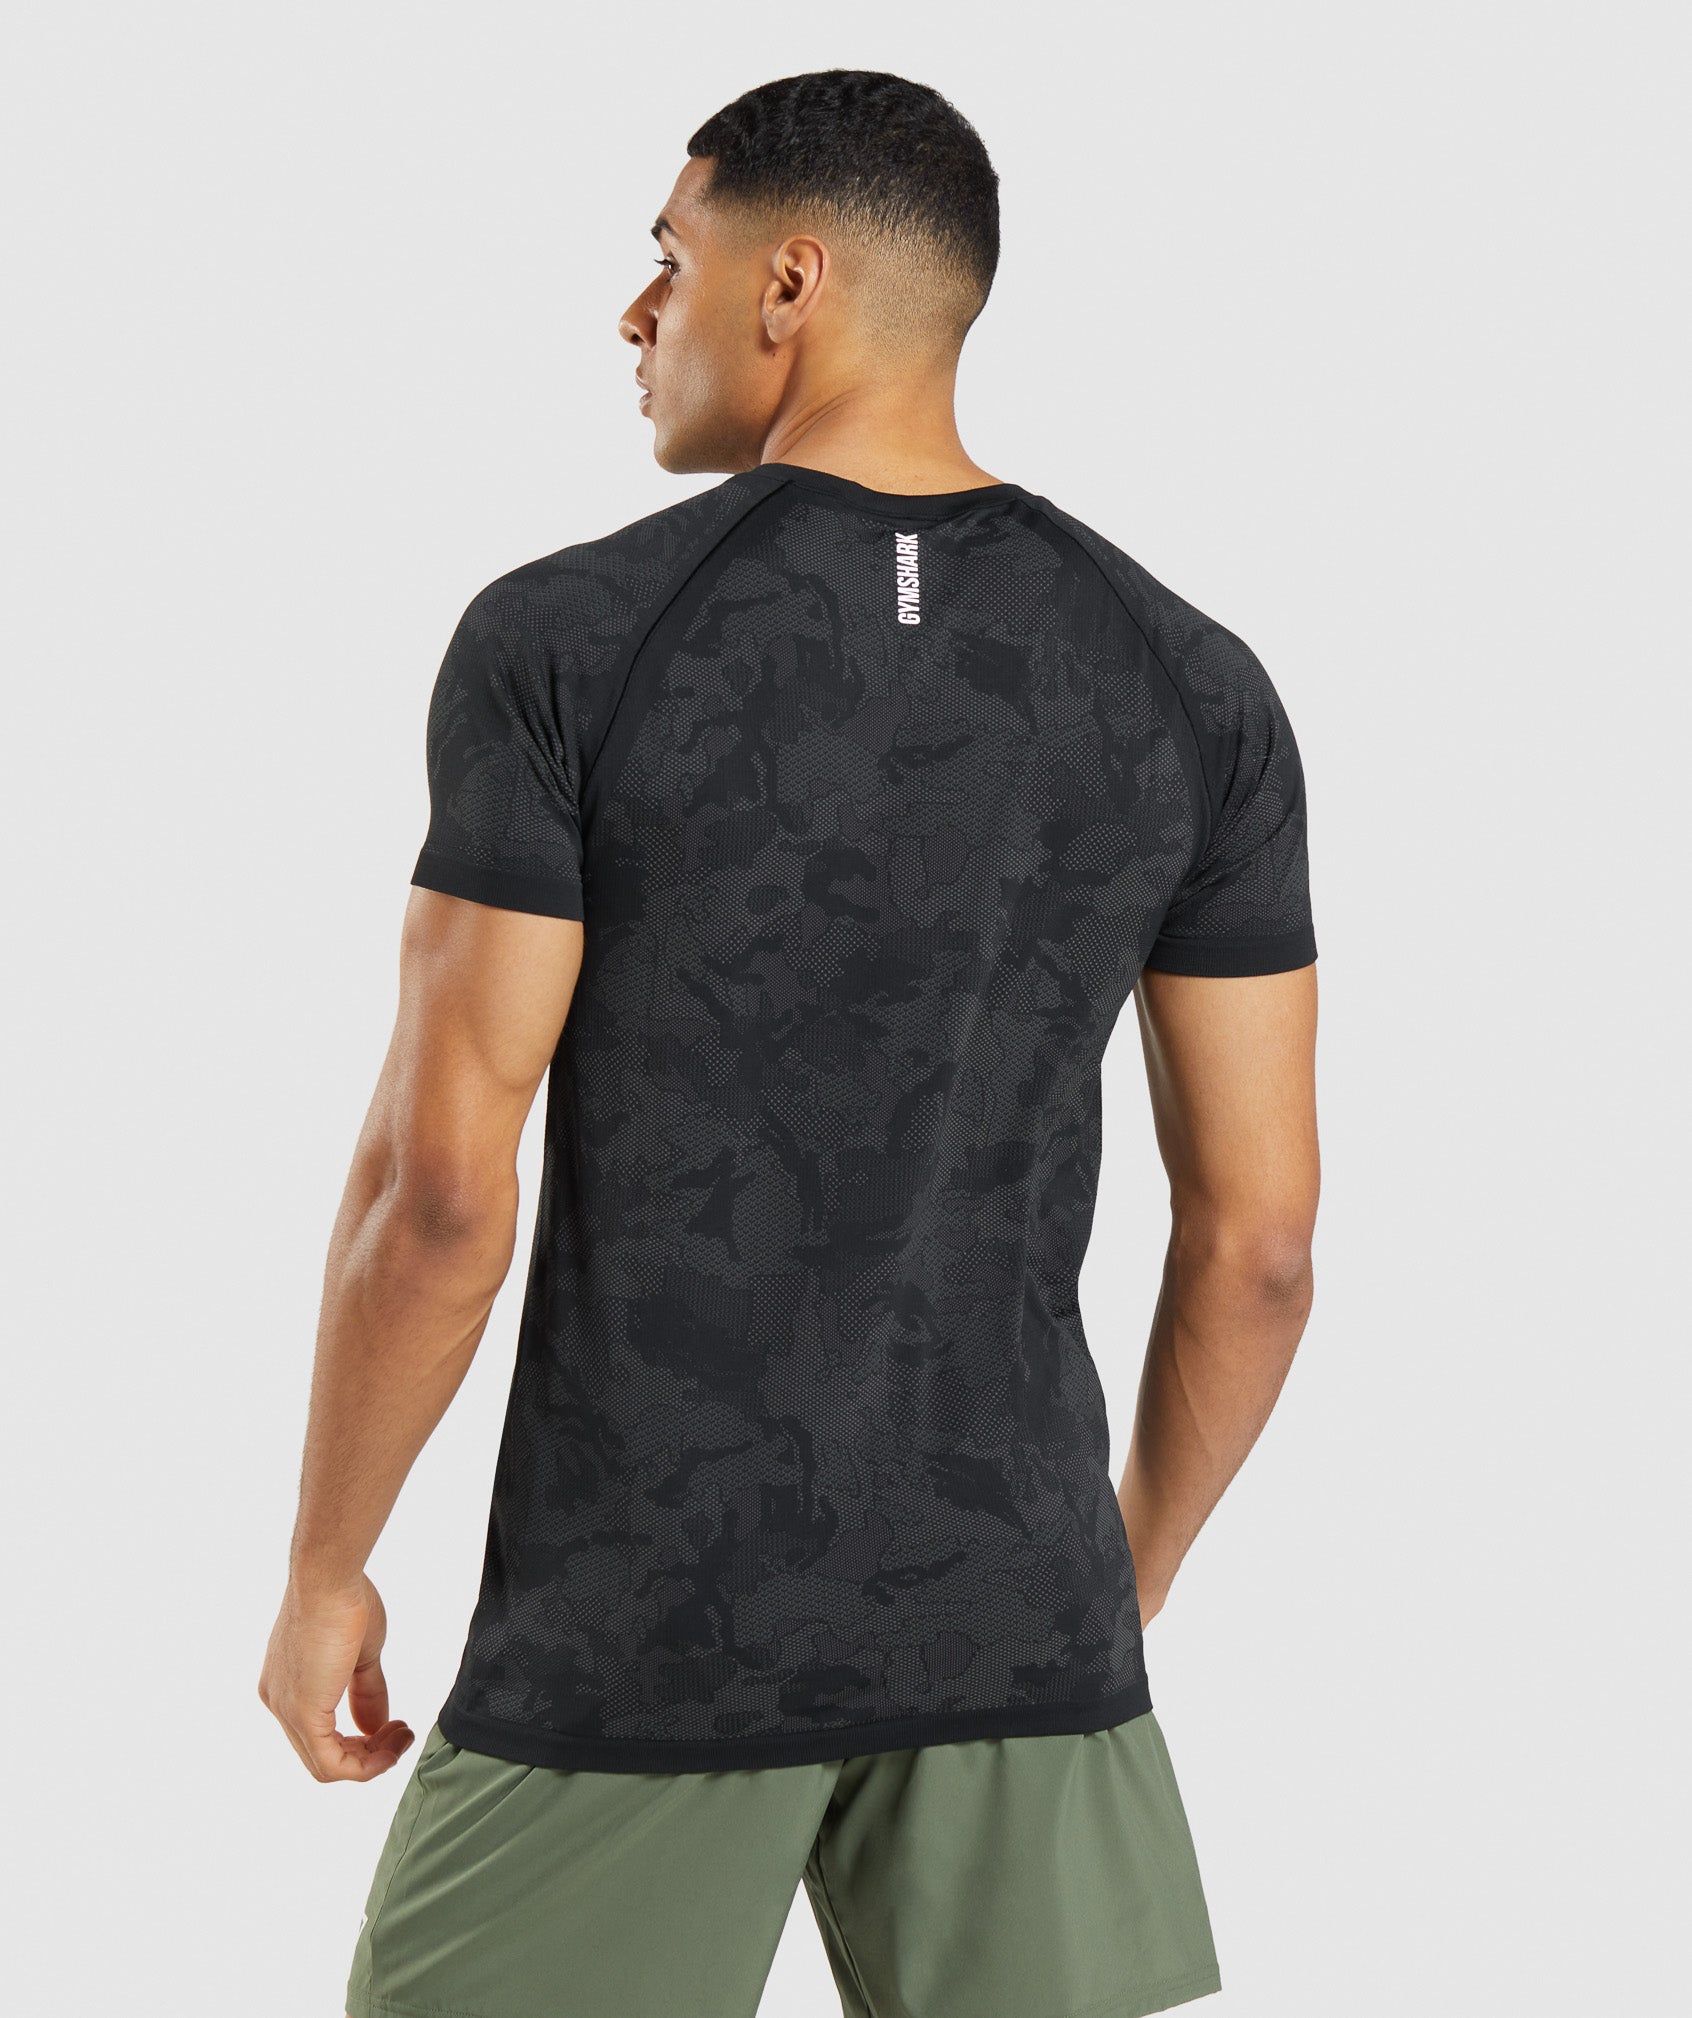 Geo Seamless T-Shirt in Black/Charcoal Grey - view 2